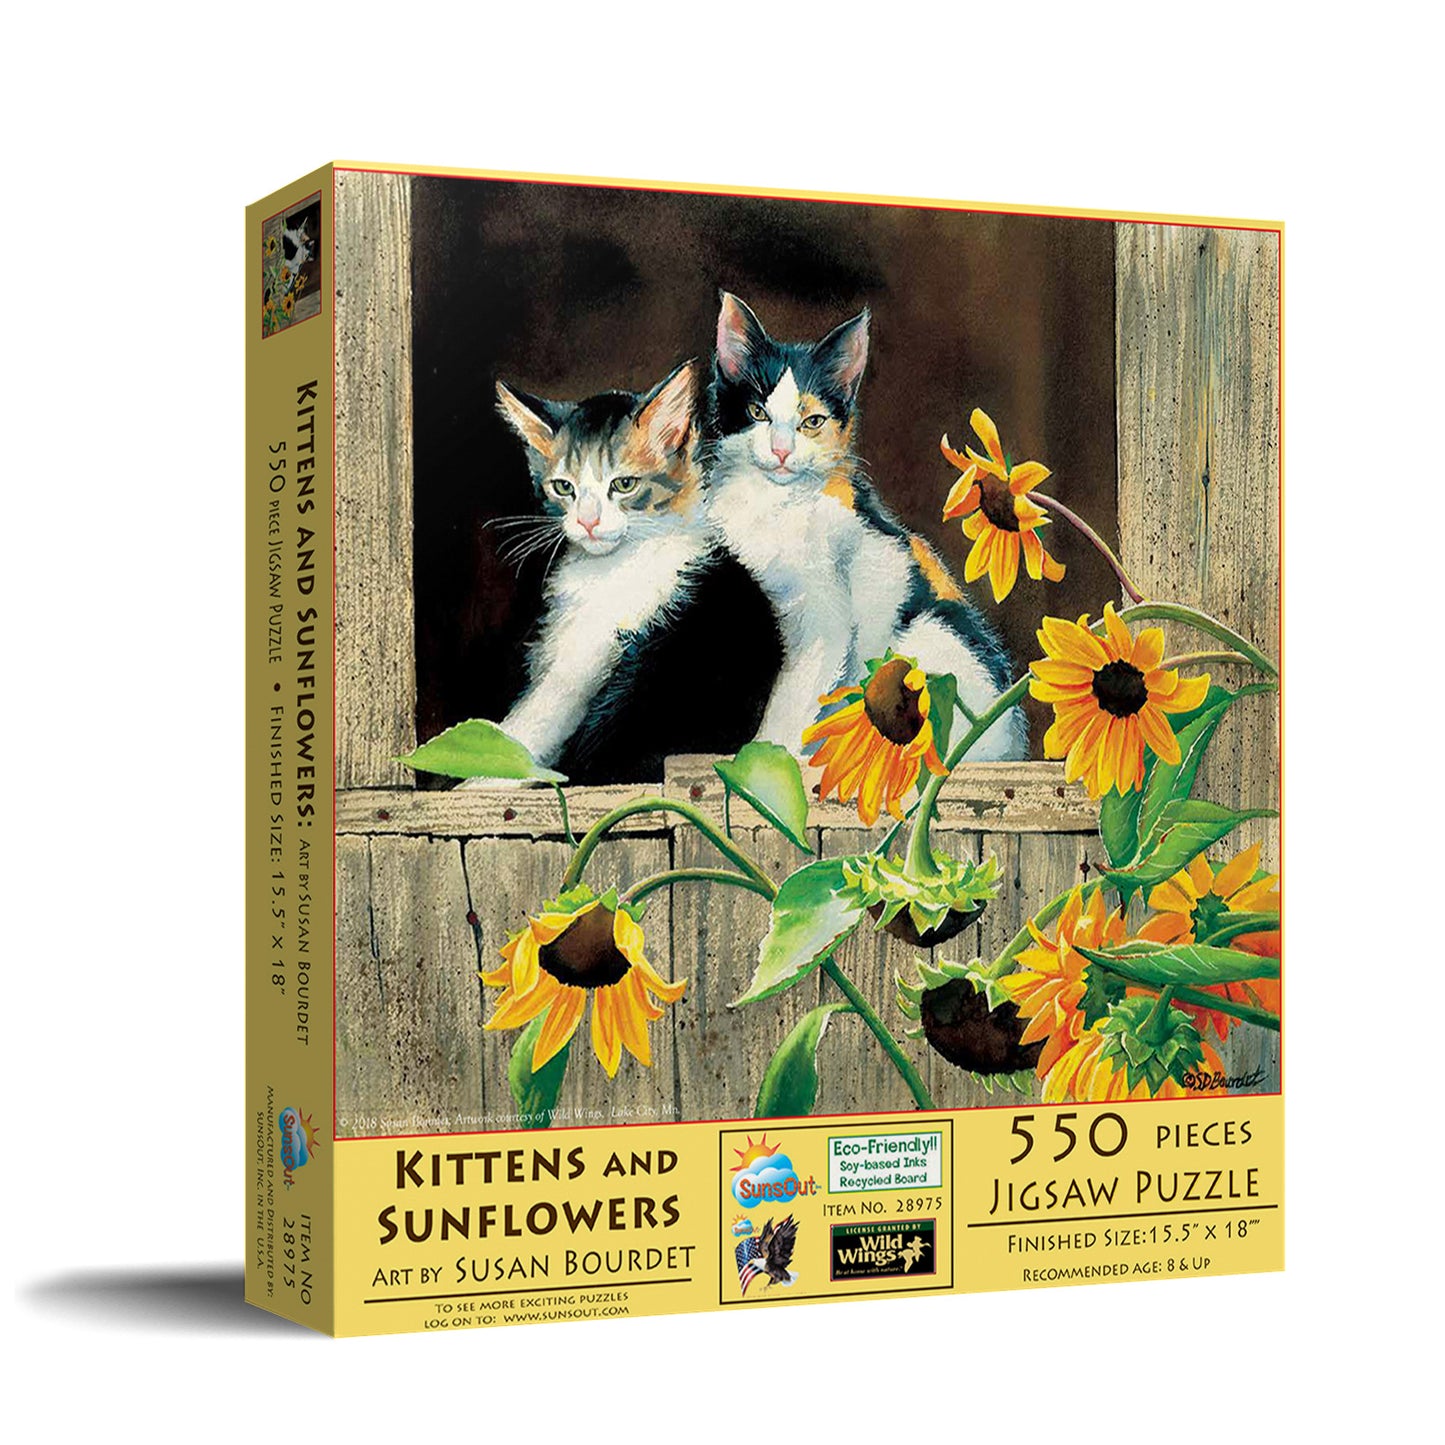 Kittens and Sunflowers - 550 Piece Jigsaw Puzzle